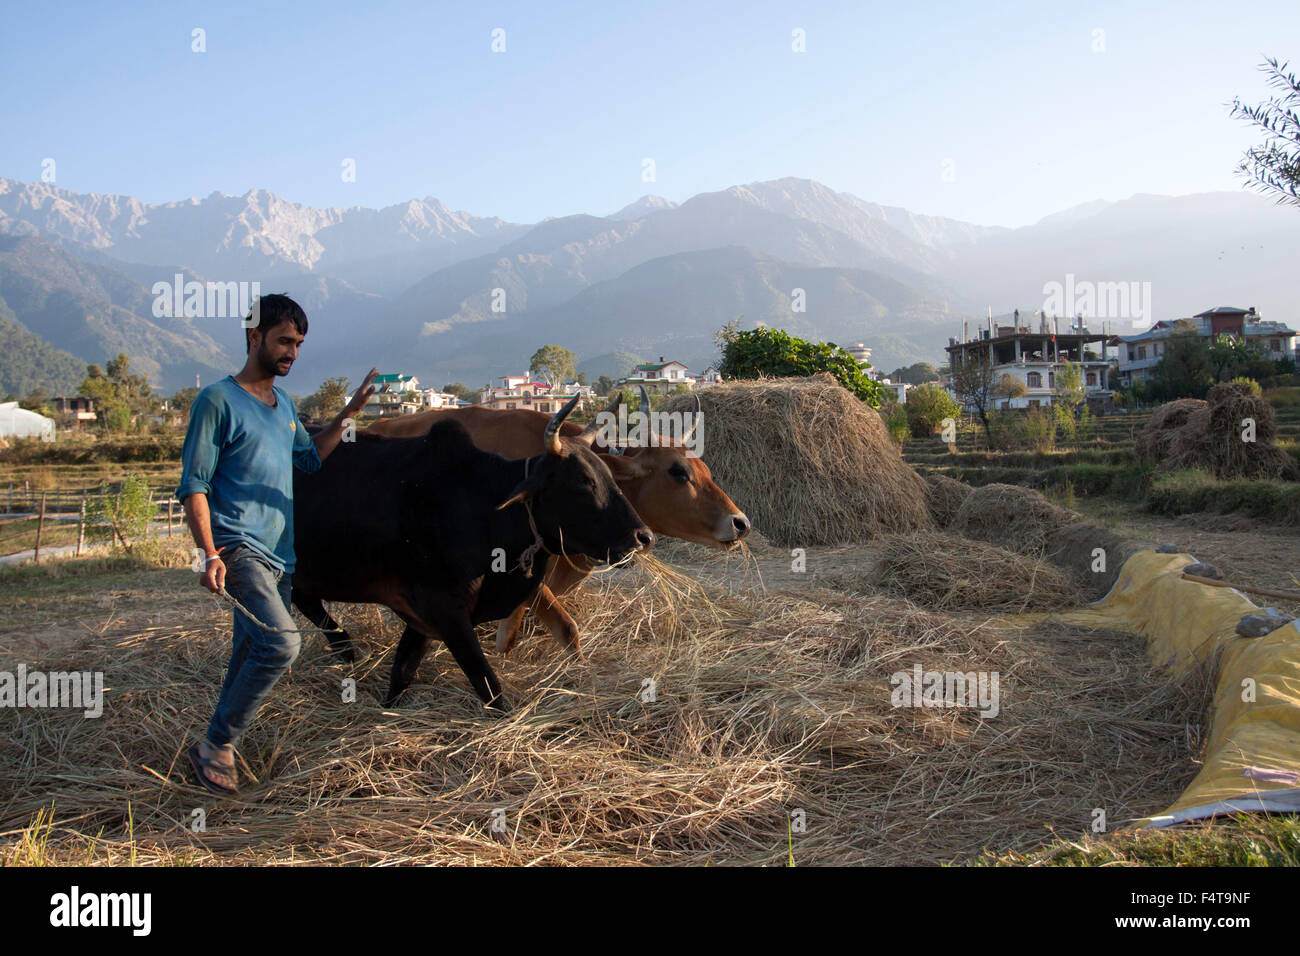 India. 22nd Oct, 2015. Ranjit Singh, 25 years working with the paddy crop by using ox instead of new technology to harvest rice in Dharamshala. He said that 'there is small landholding and by using traditional method still they get the grain for whole year and straw used for cattle fodder for winter season as there is no green fodder during winter season'. © Shailesh Bhatangar/Pacific Press/Alamy Live News Stock Photo